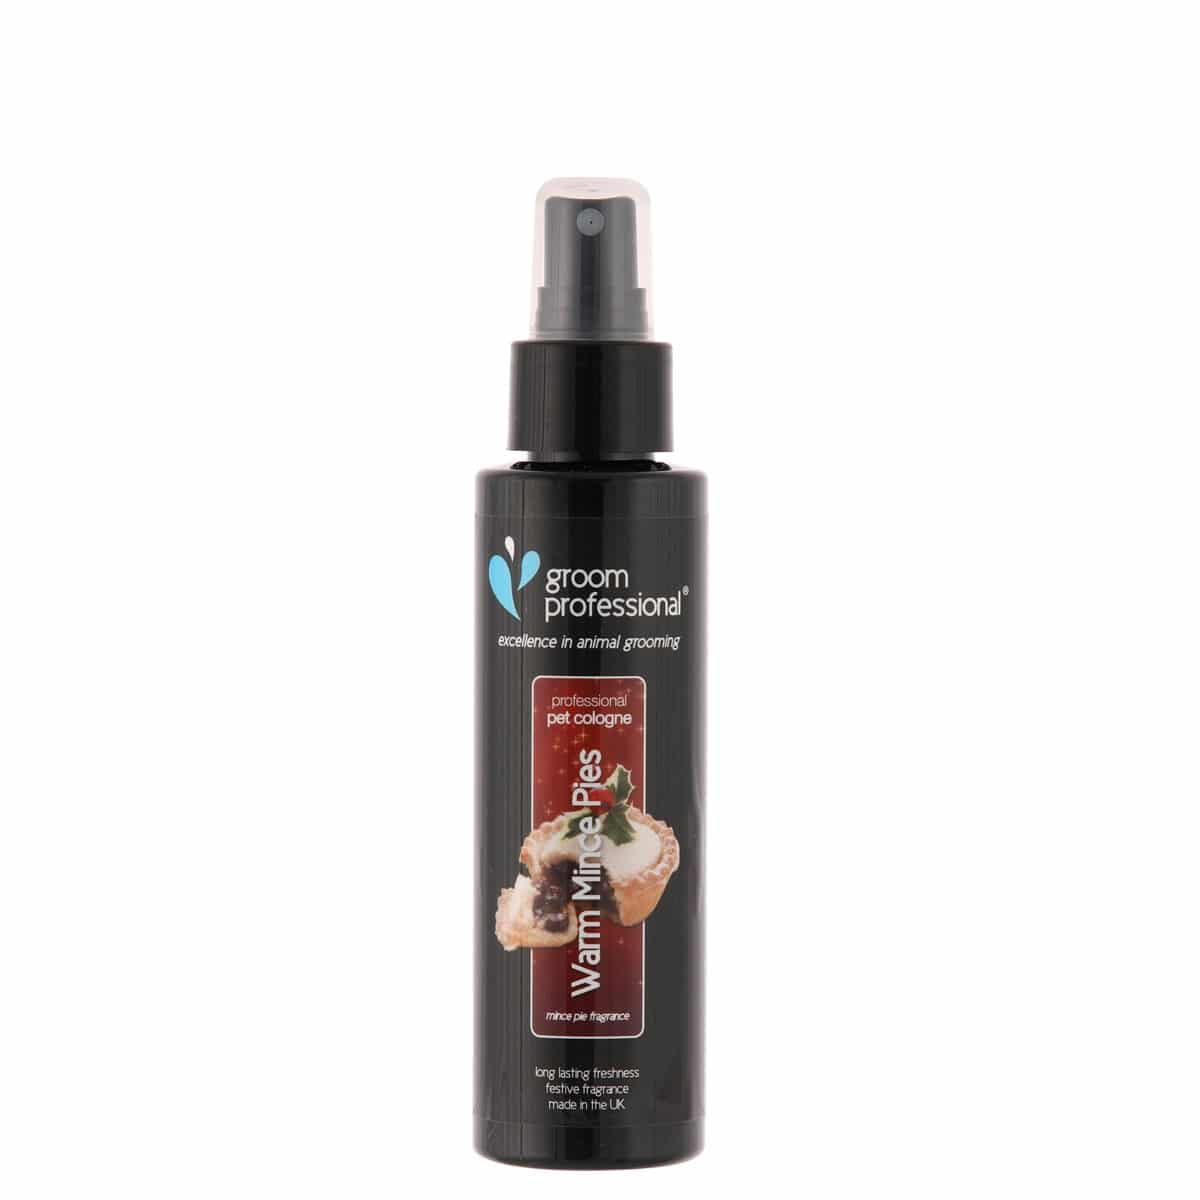 Groom Professional warm mince pie cologne